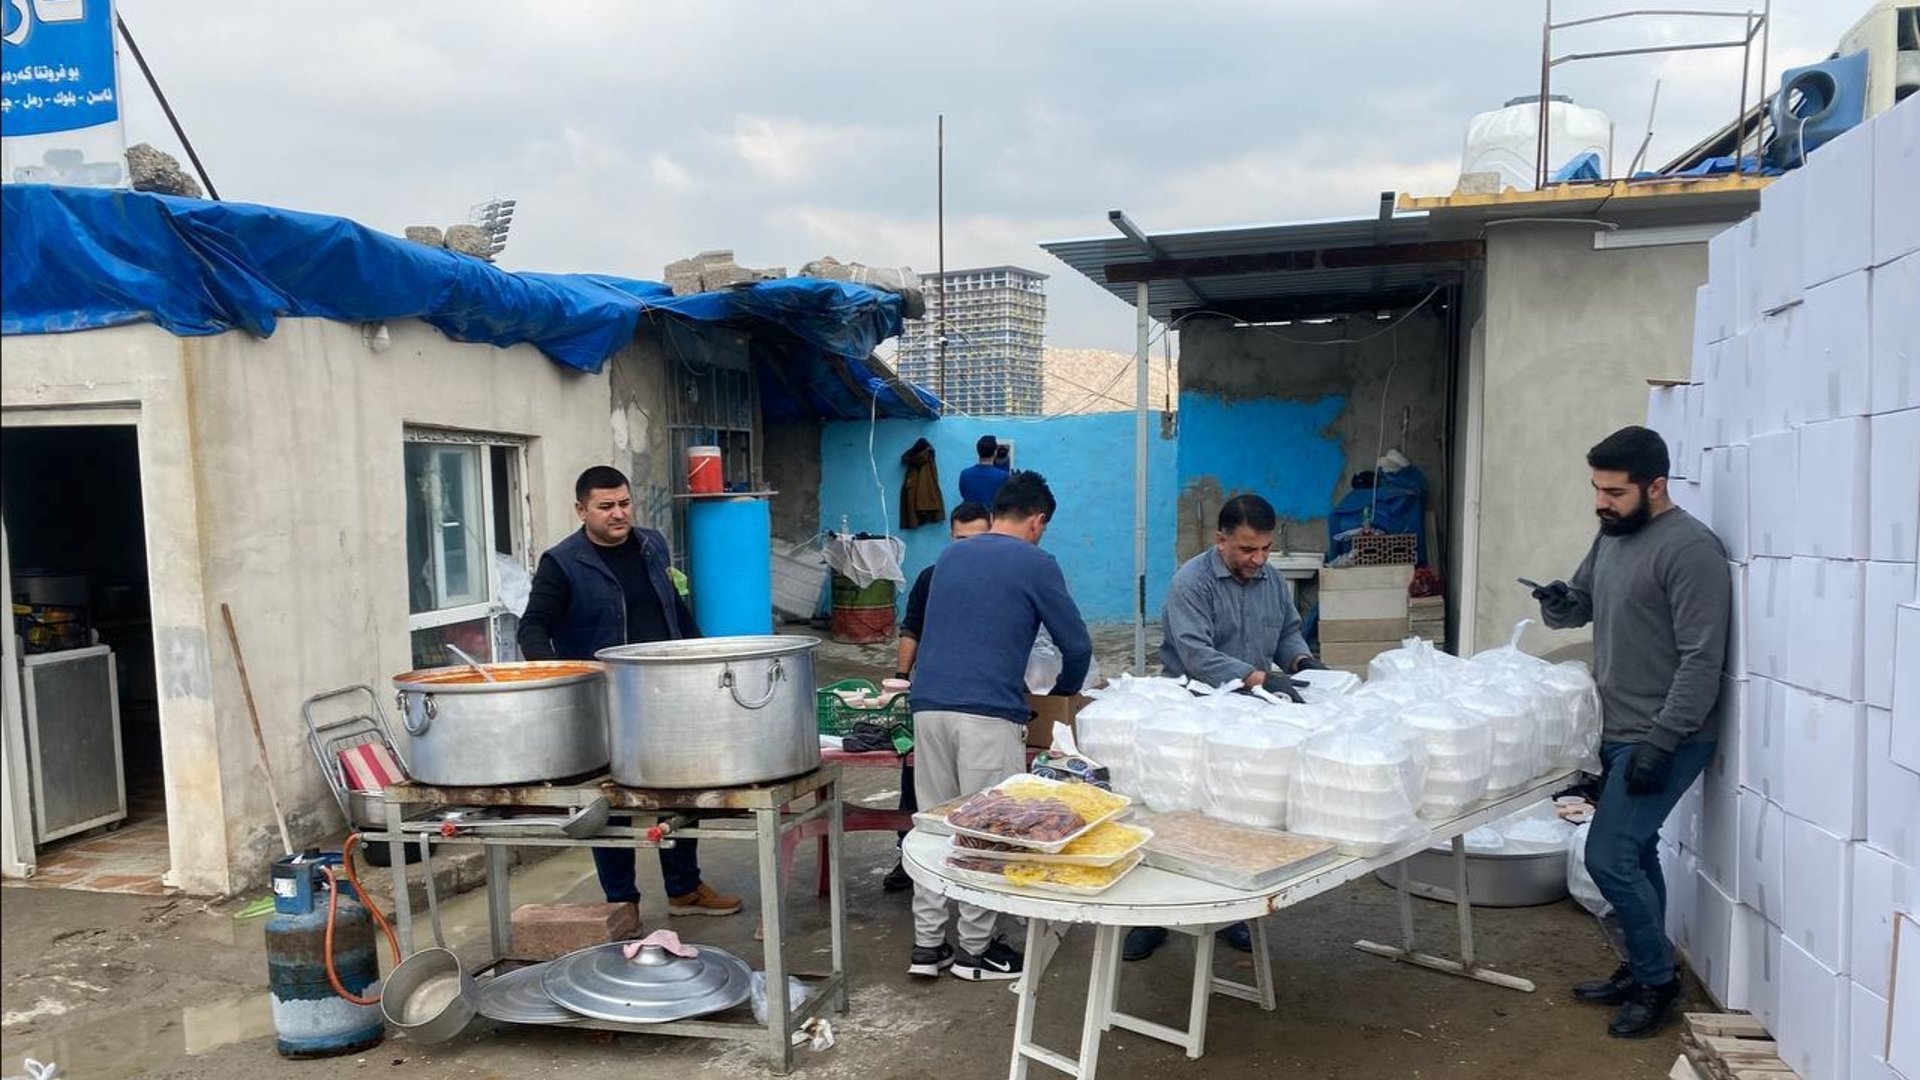 Duhok resident provides weekly free meals for workers